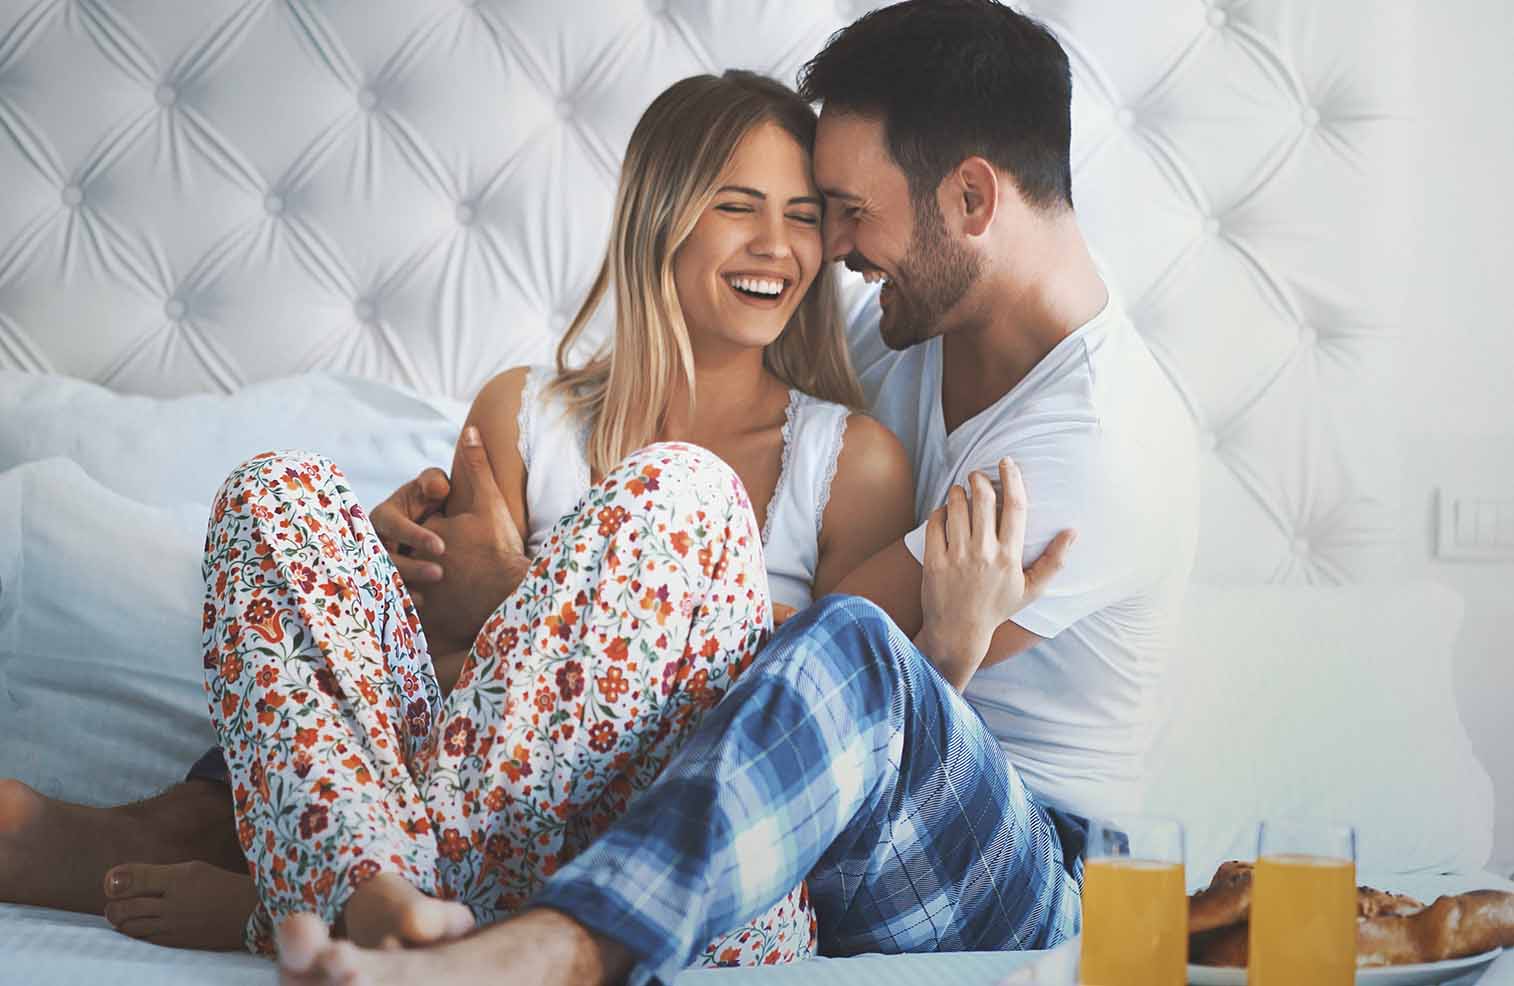 Feel like you're in a romance slump? Wish you could get your husband to be more romantic? You can with these tips to boost romance in your relationship!